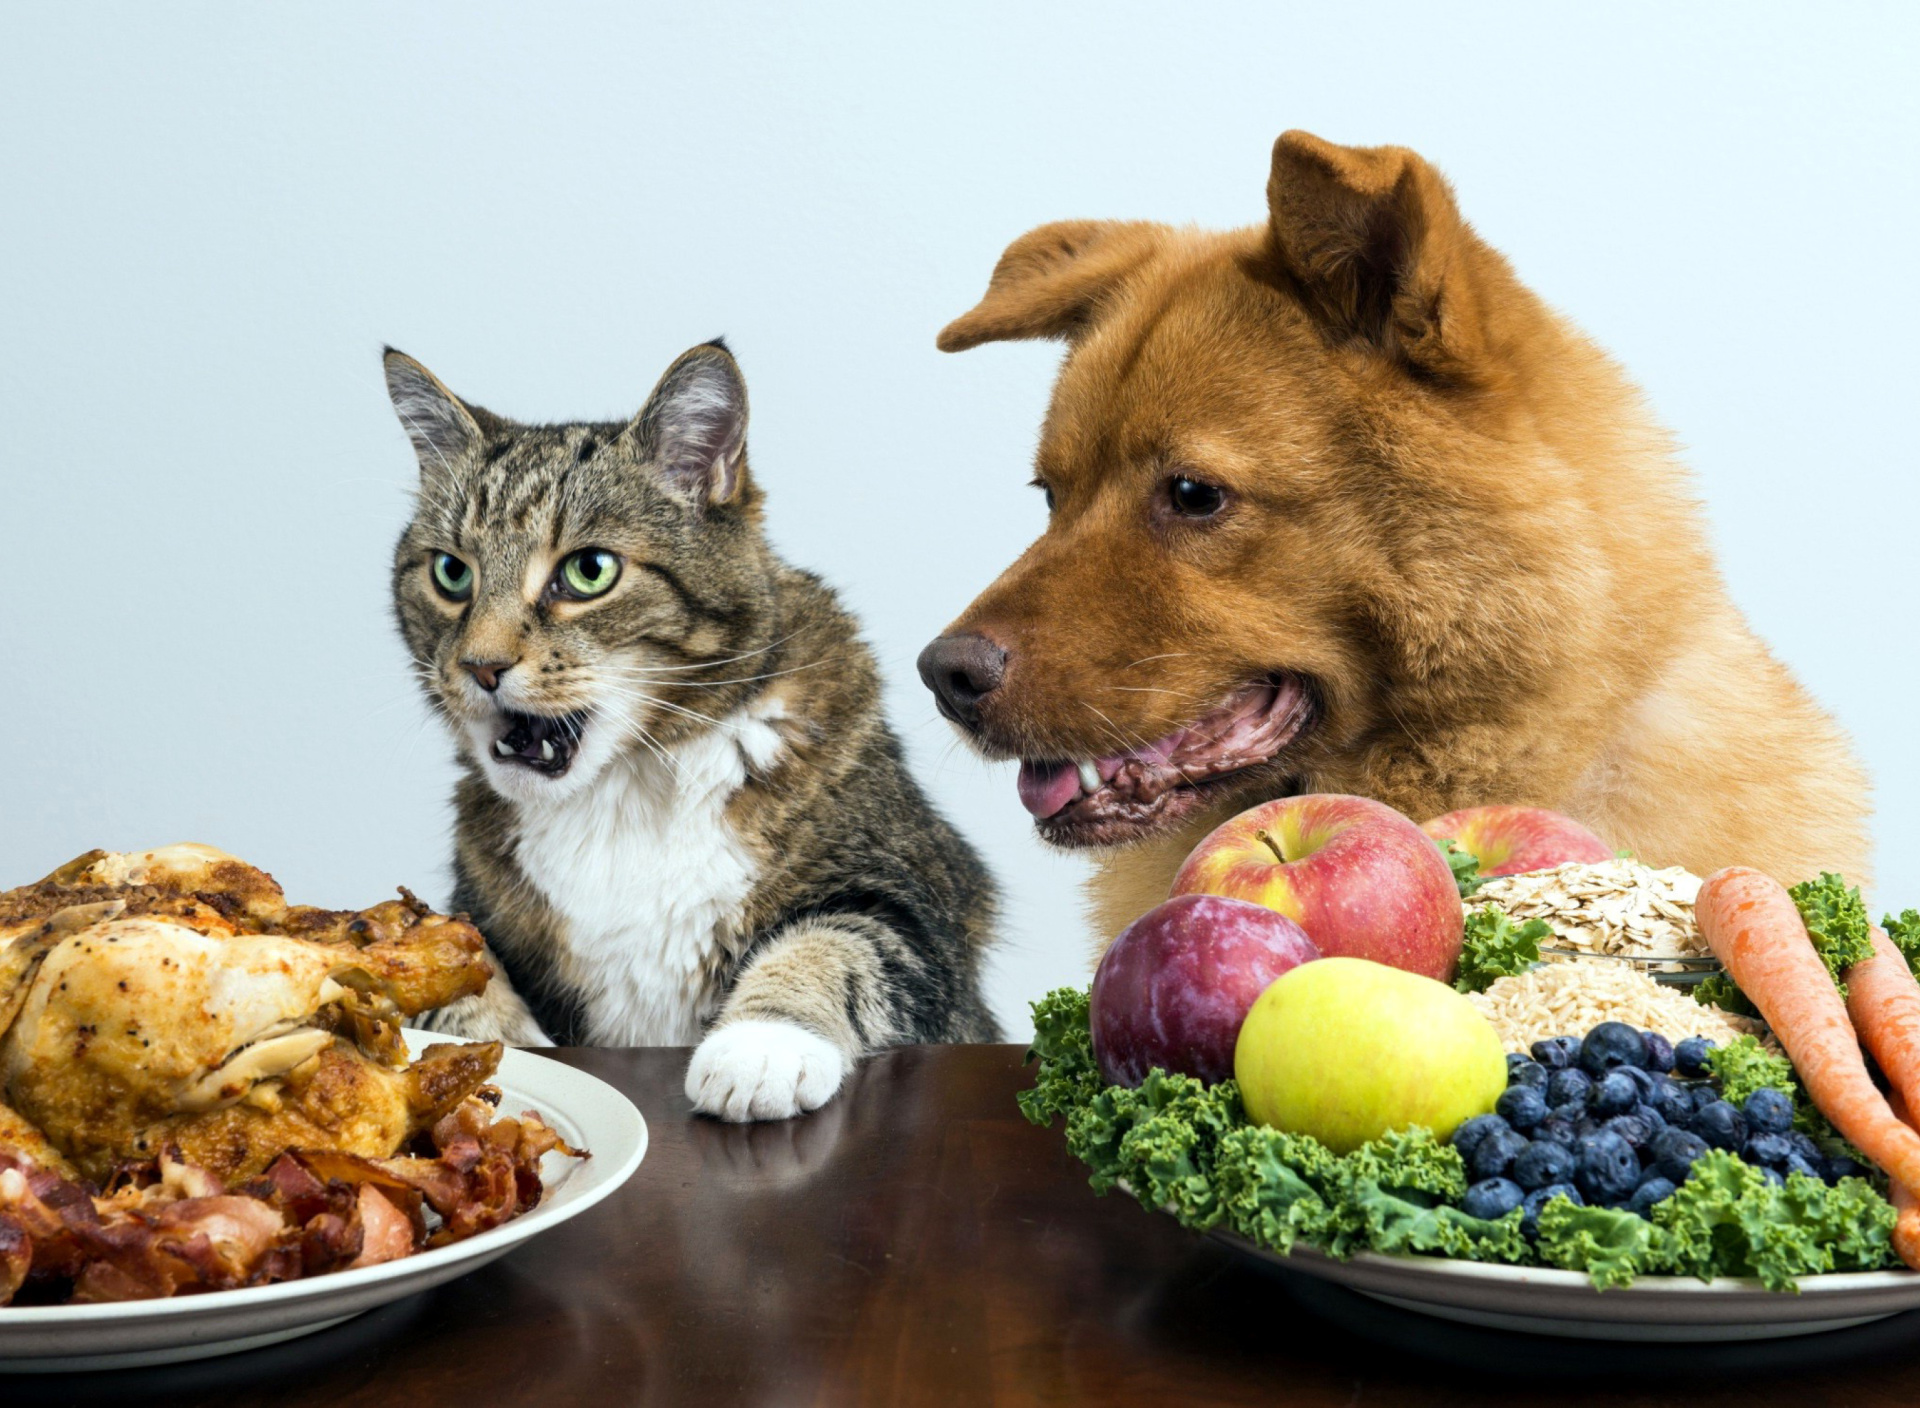 Dog and Cat Dinner wallpaper 1920x1408